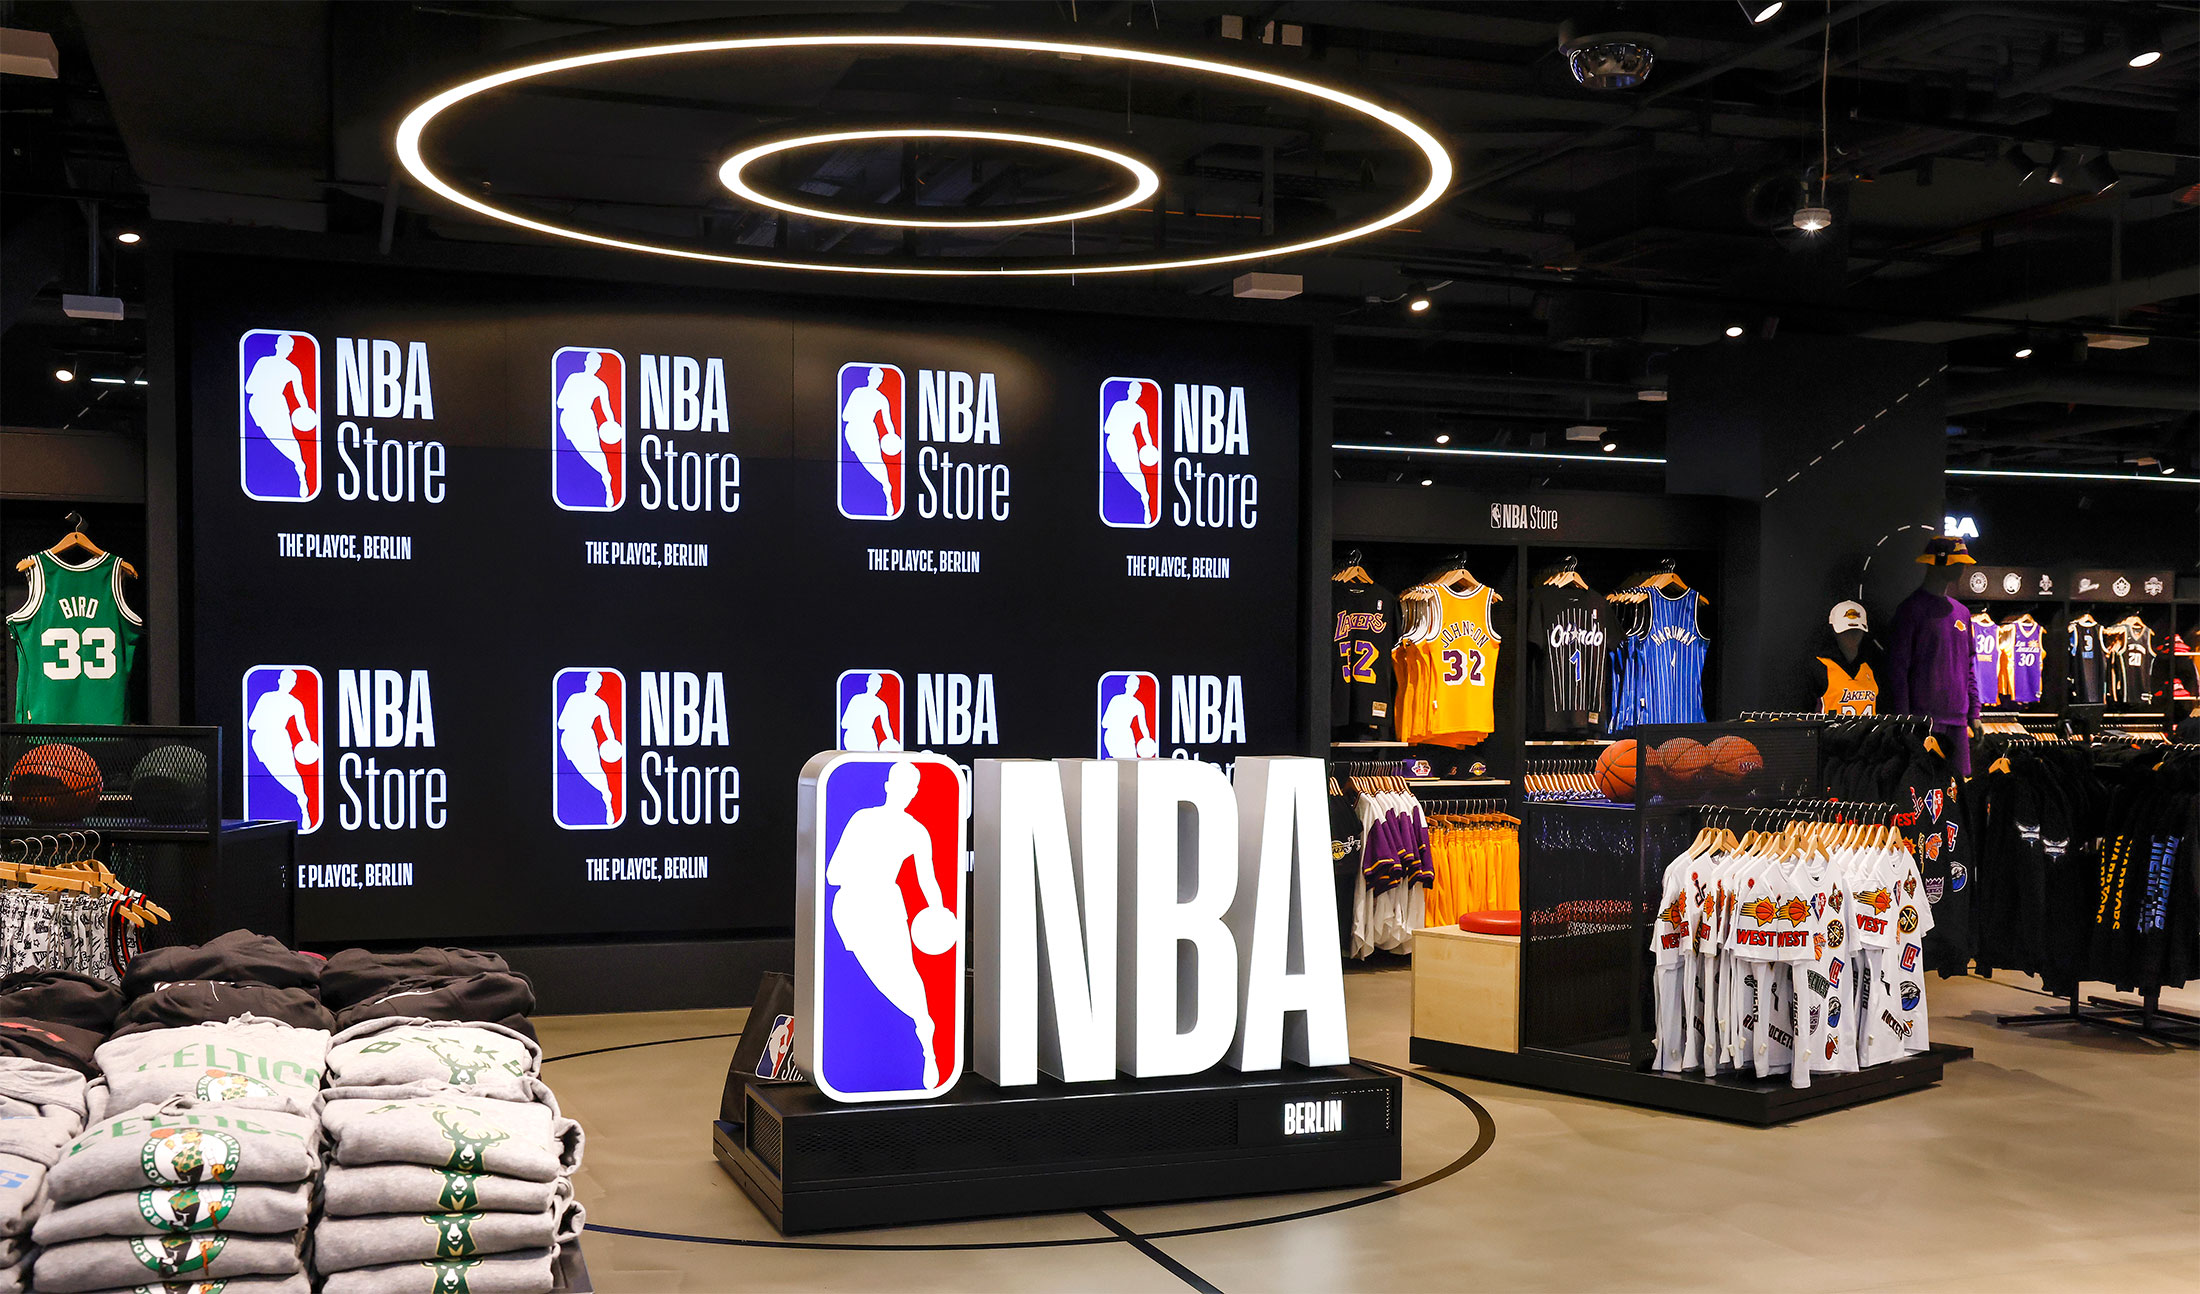 The interior of an NBA store with a prominent NBA logo in the center, surrounded by merchandise displays including jerseys, basketballs, and other NBA-themed apparel.